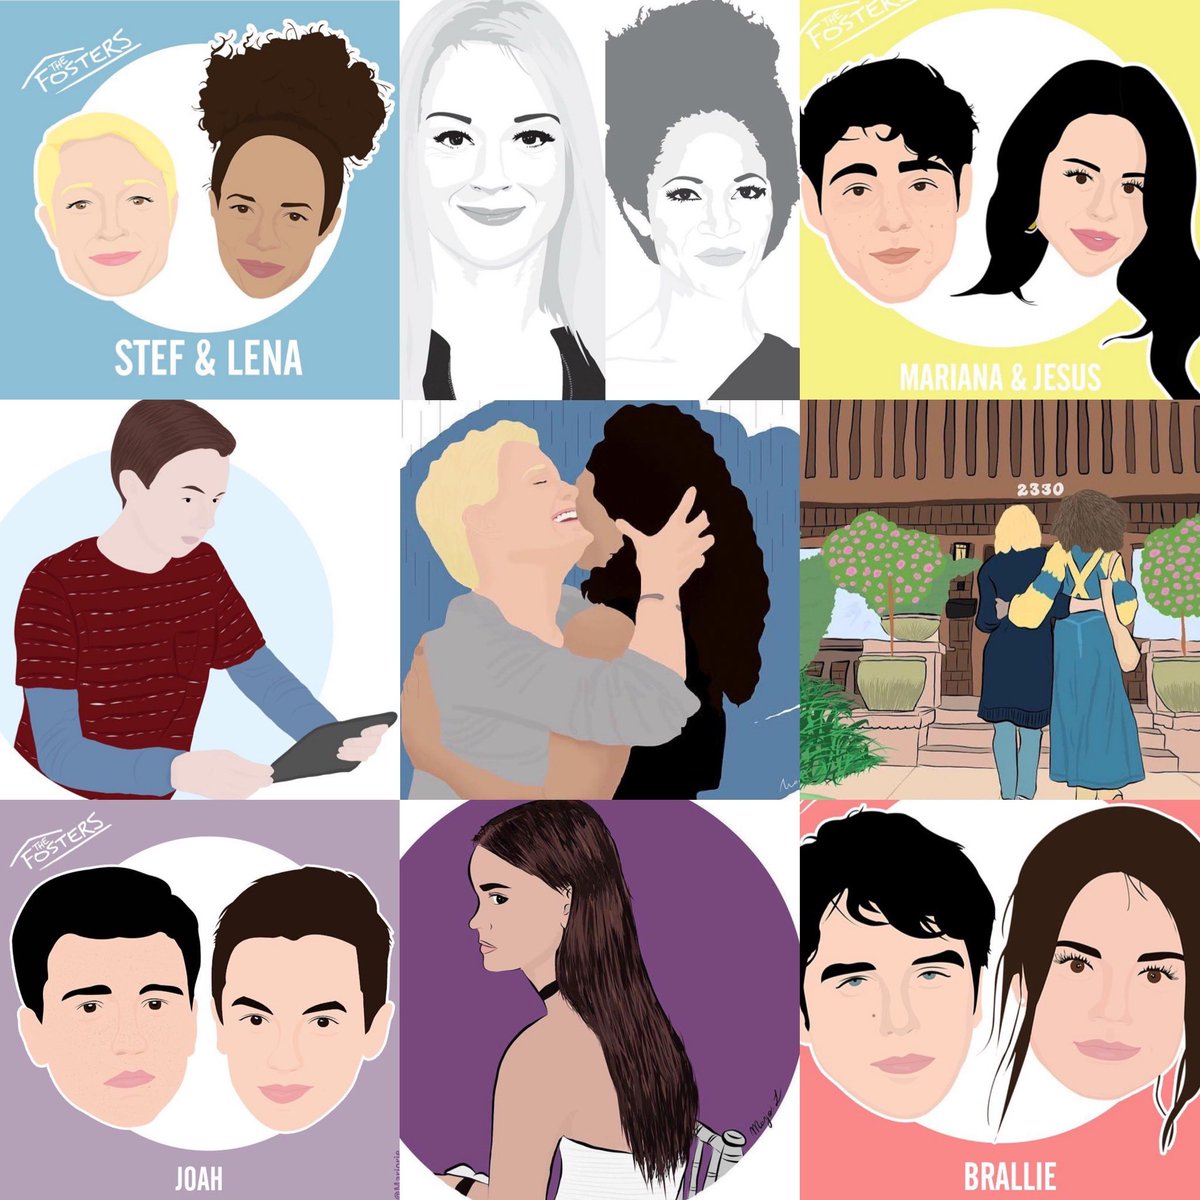 some of my different arts along the years about The Fosters. A great source of inspiration #TheFostersTenYearAnniversary